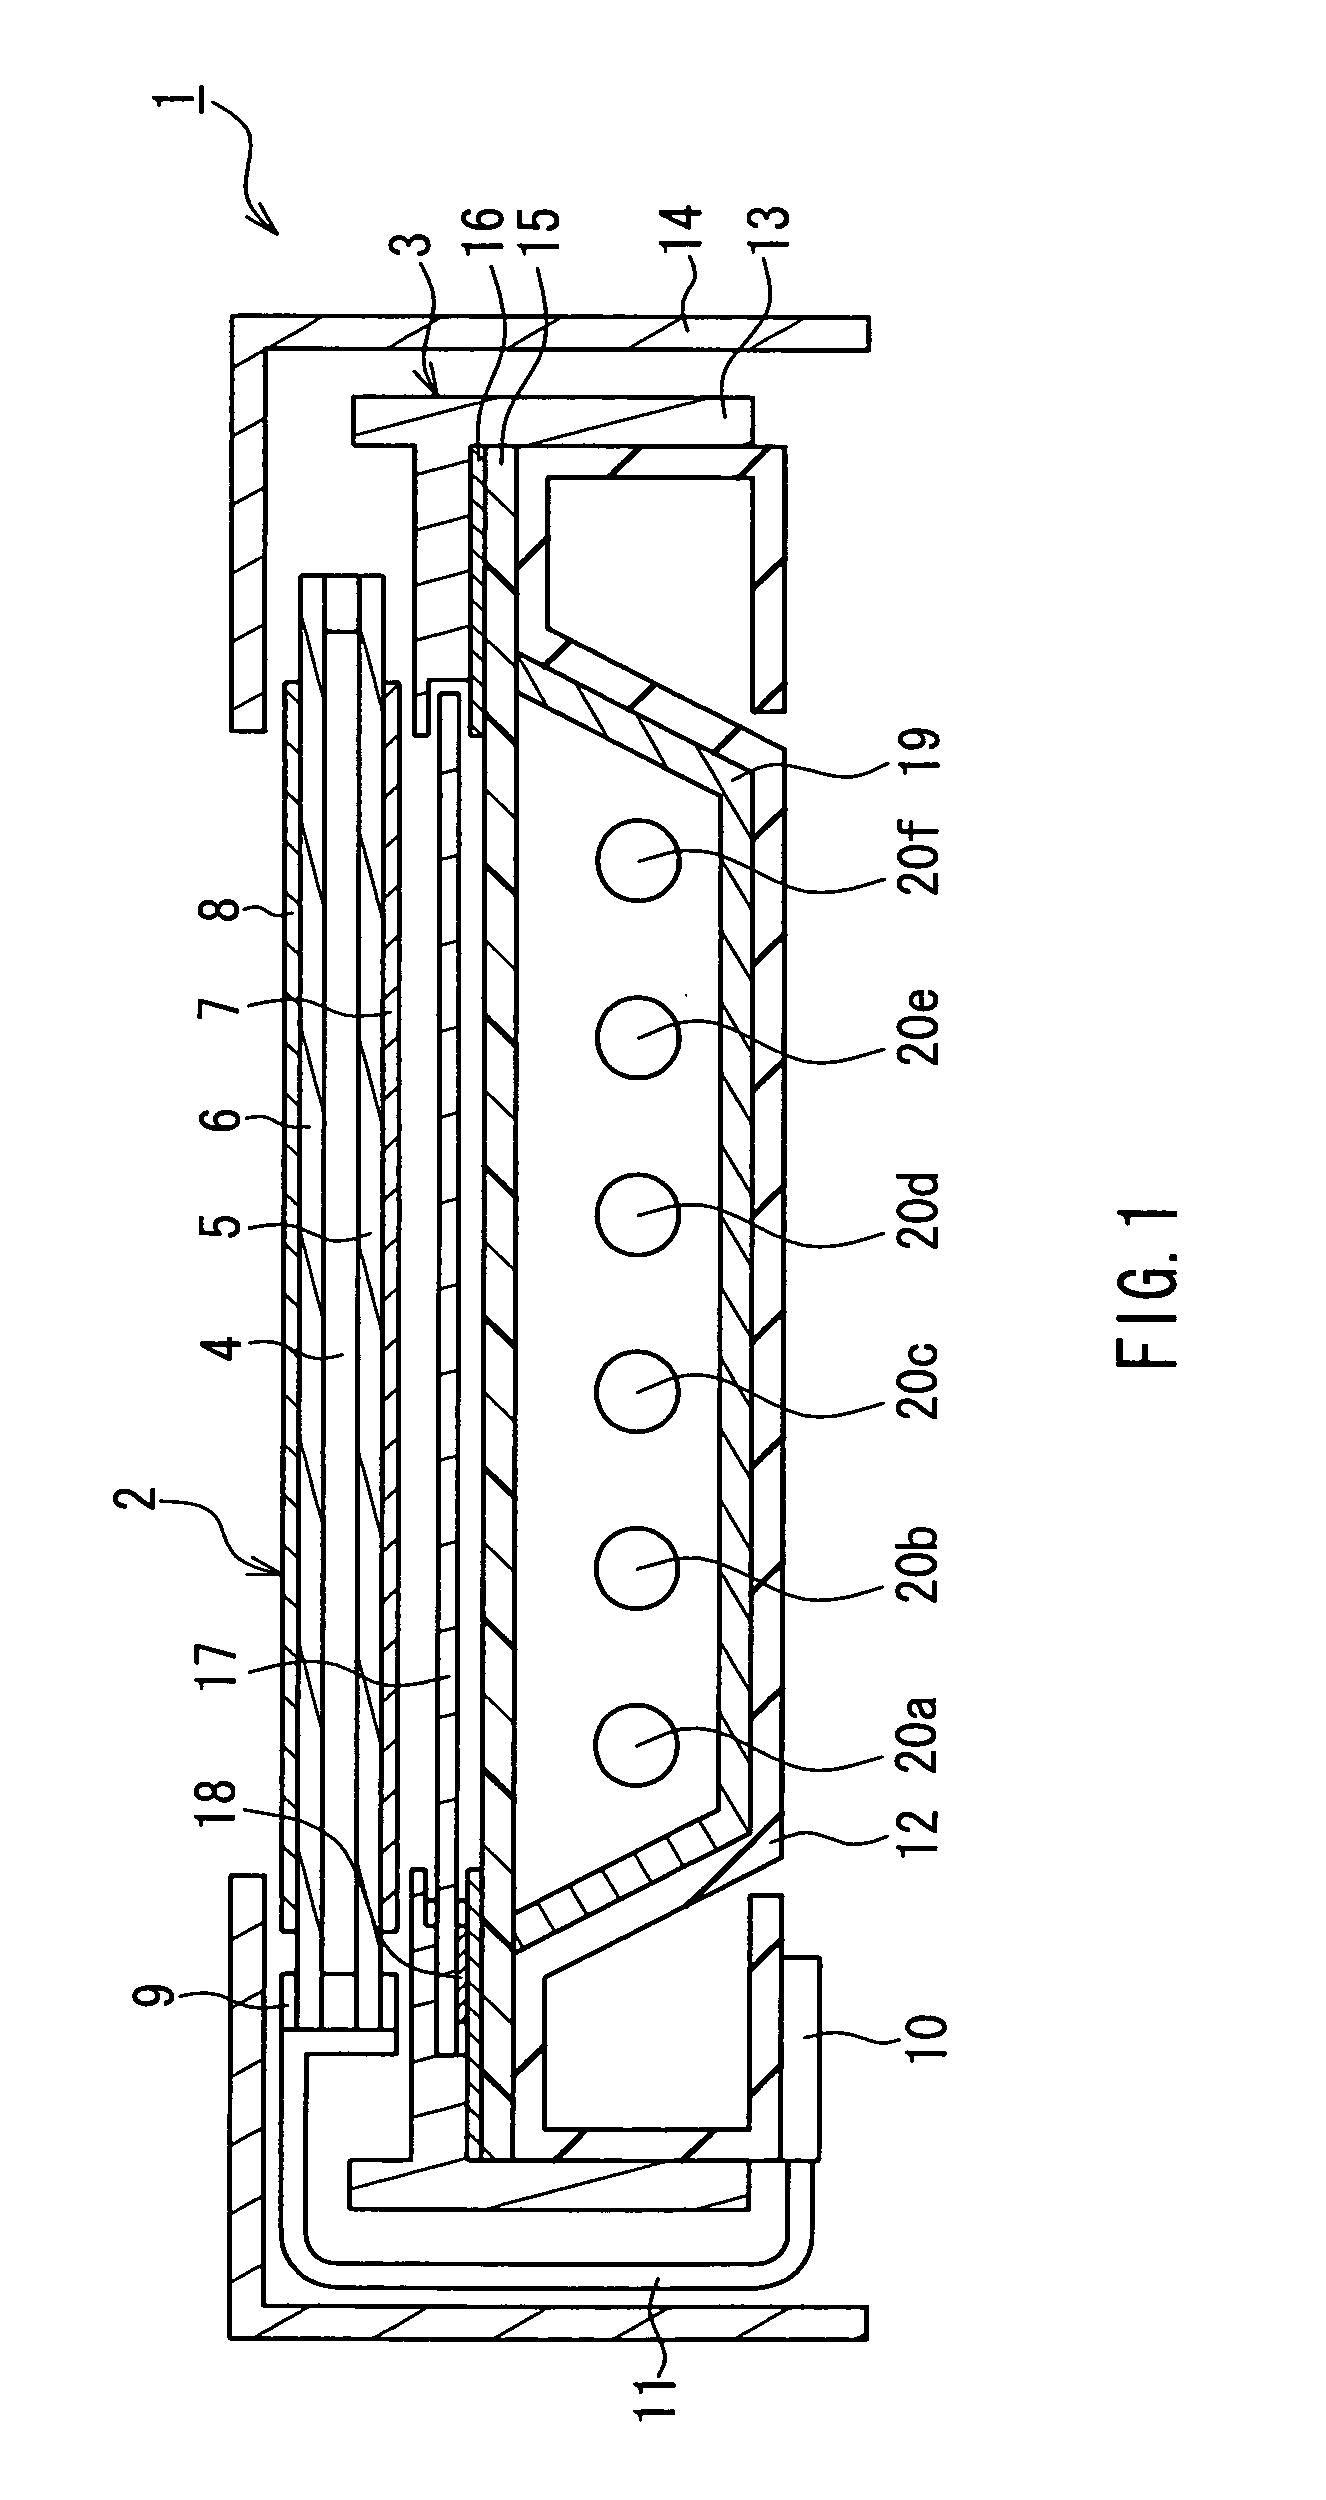 Backlight Device, Display Device, and Television Receiver